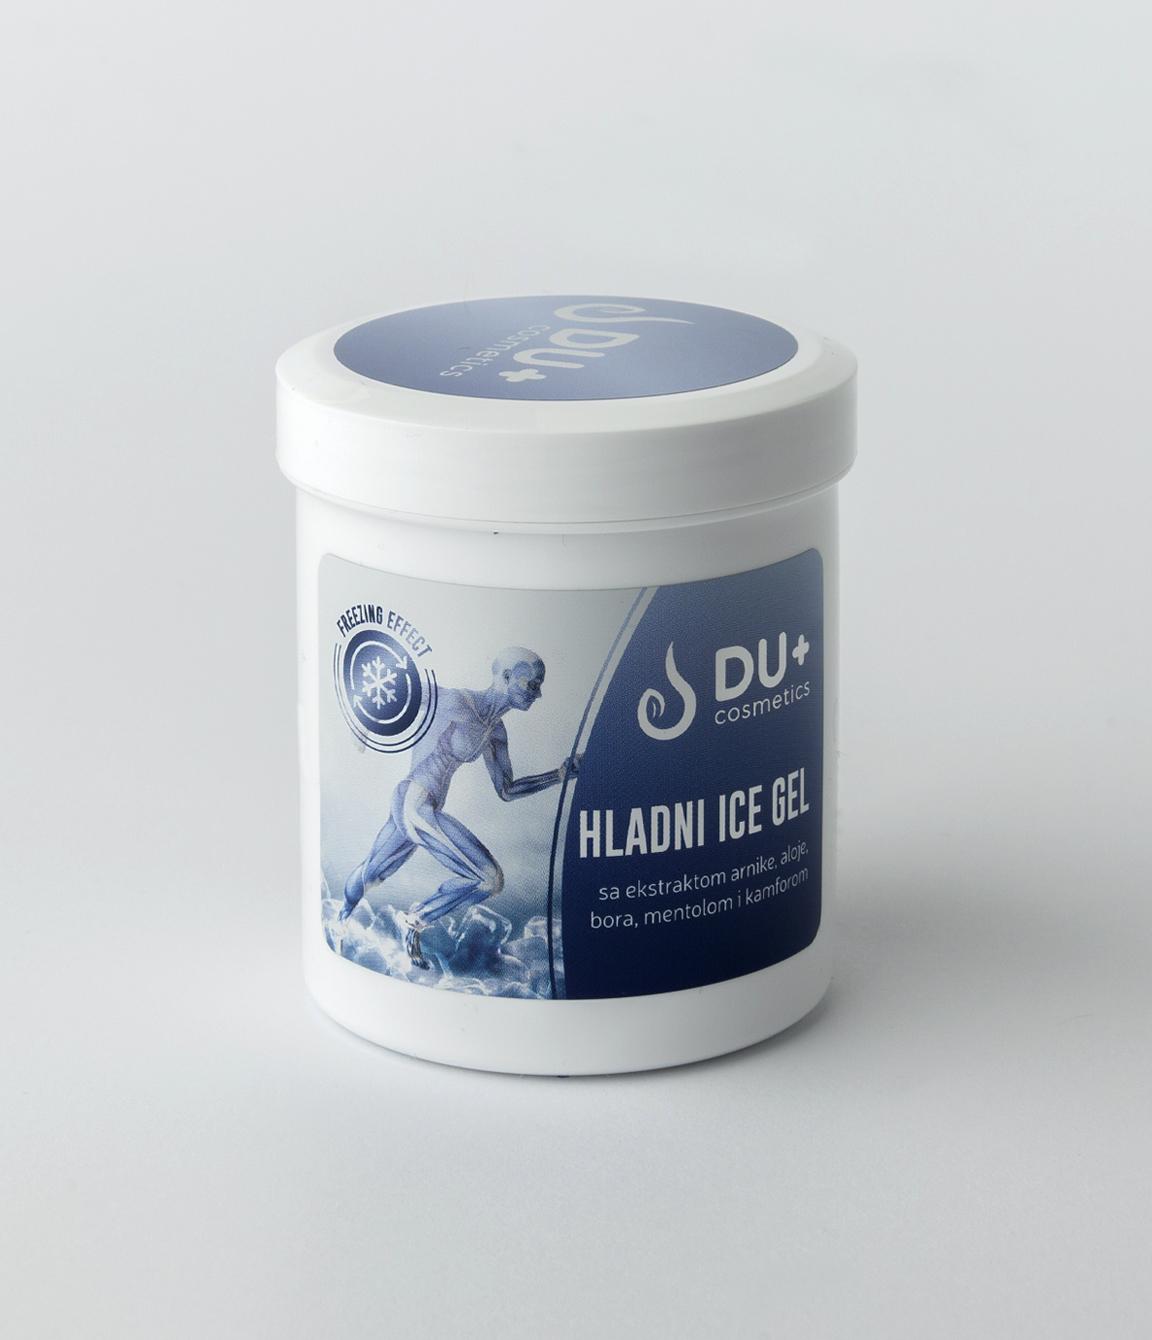 Selected image for Du+ Cosmetics Hladni ICE gel, 100 ml